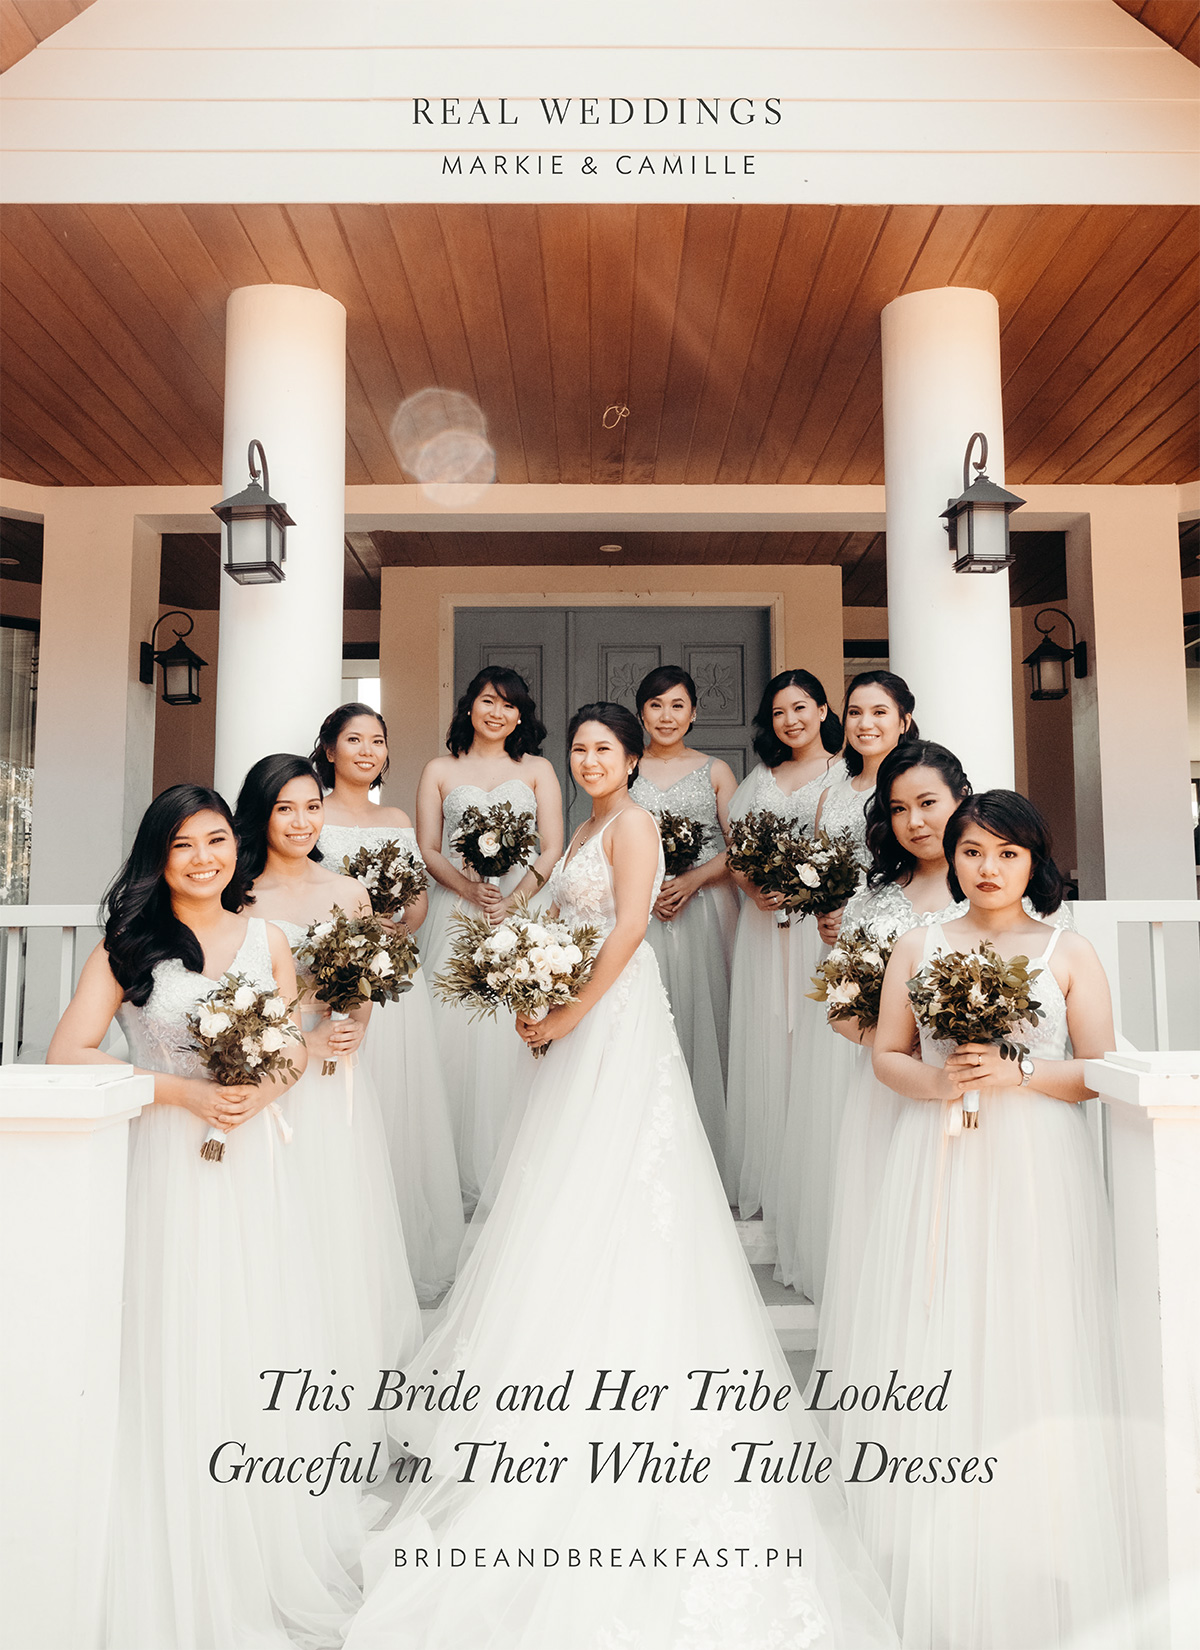 This Bride and Her Tribe Looked Graceful in Their White Tulle Dresses